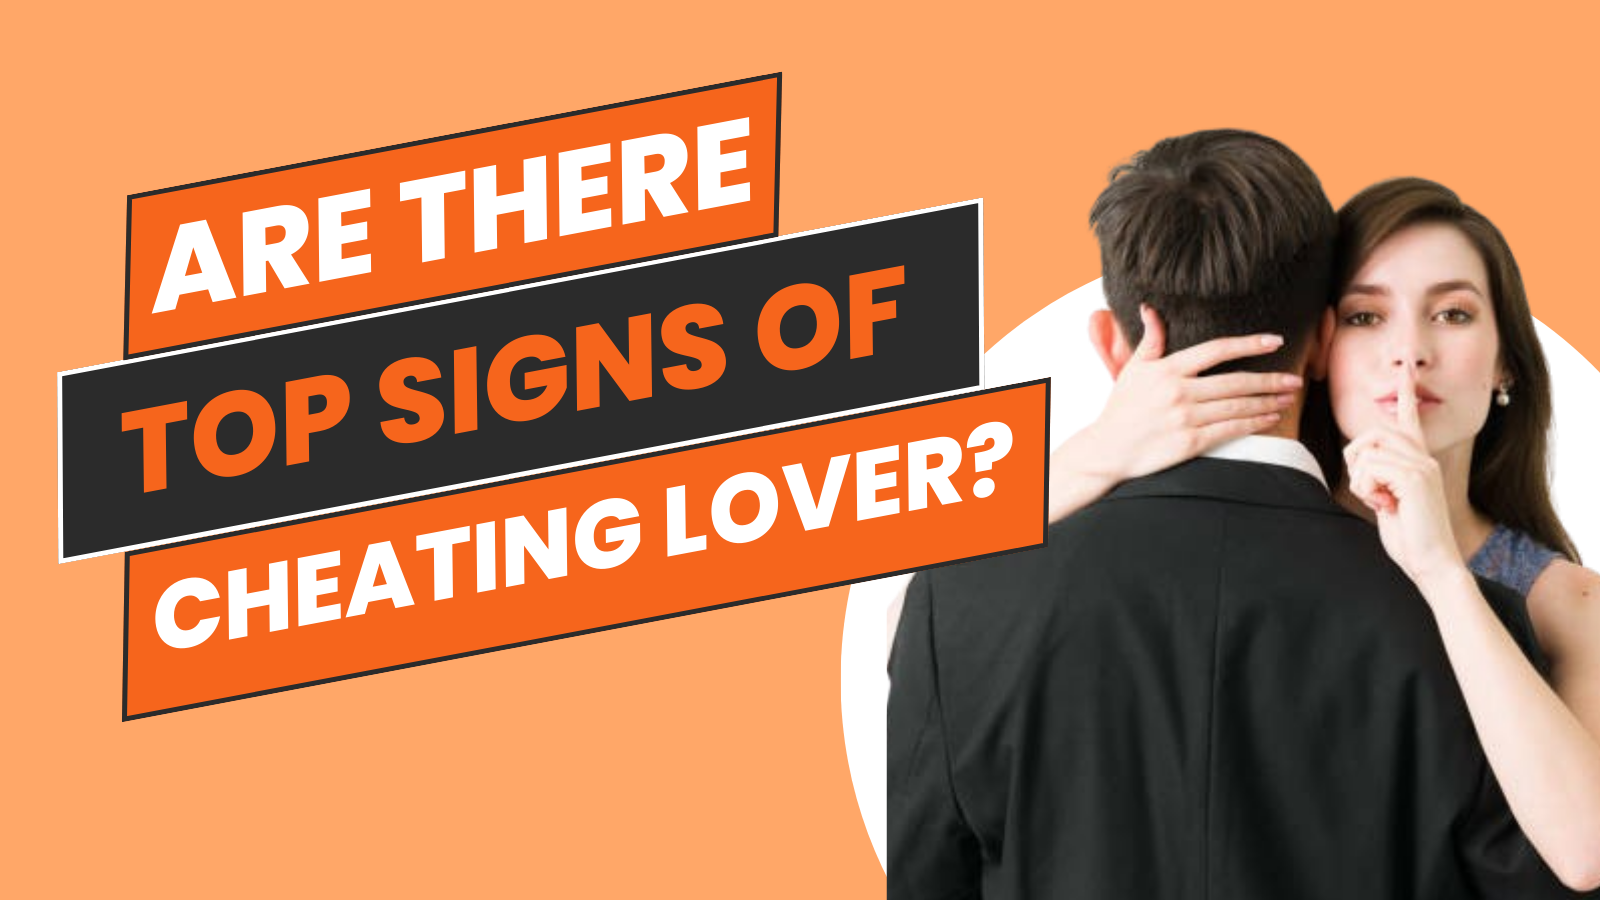 Are There Top Signs of Cheating Lover? What to do then?